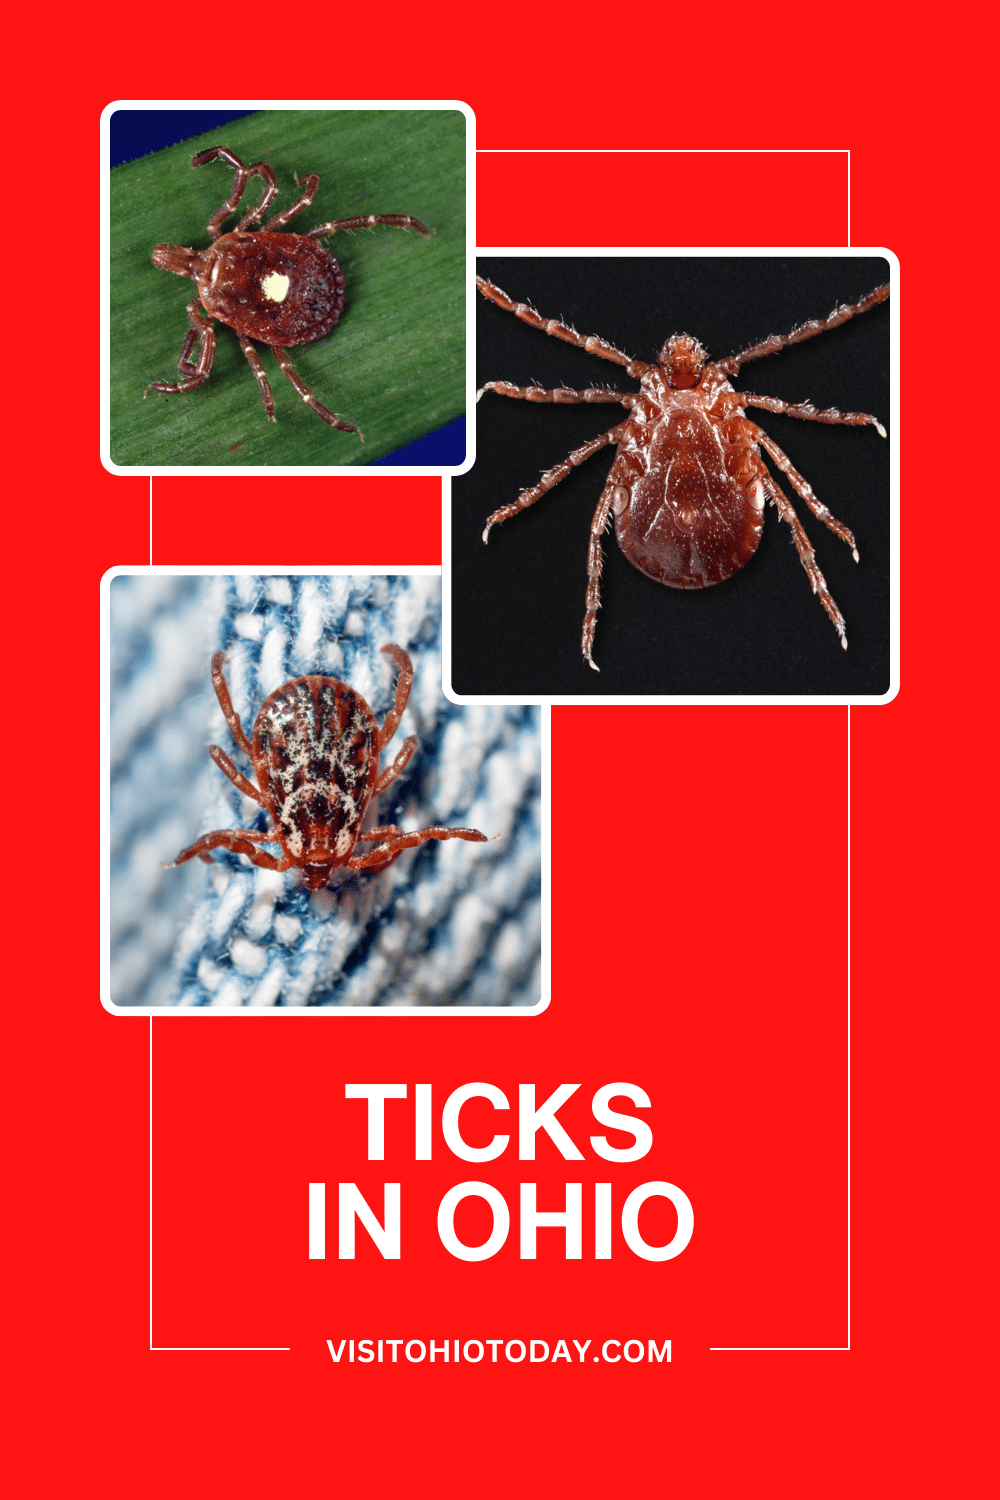 Ticks are a nuisance insect that can be found in most places around the world. There are 12 species of ticks in Ohio, some are relatively harmless, and others are disease carriers.